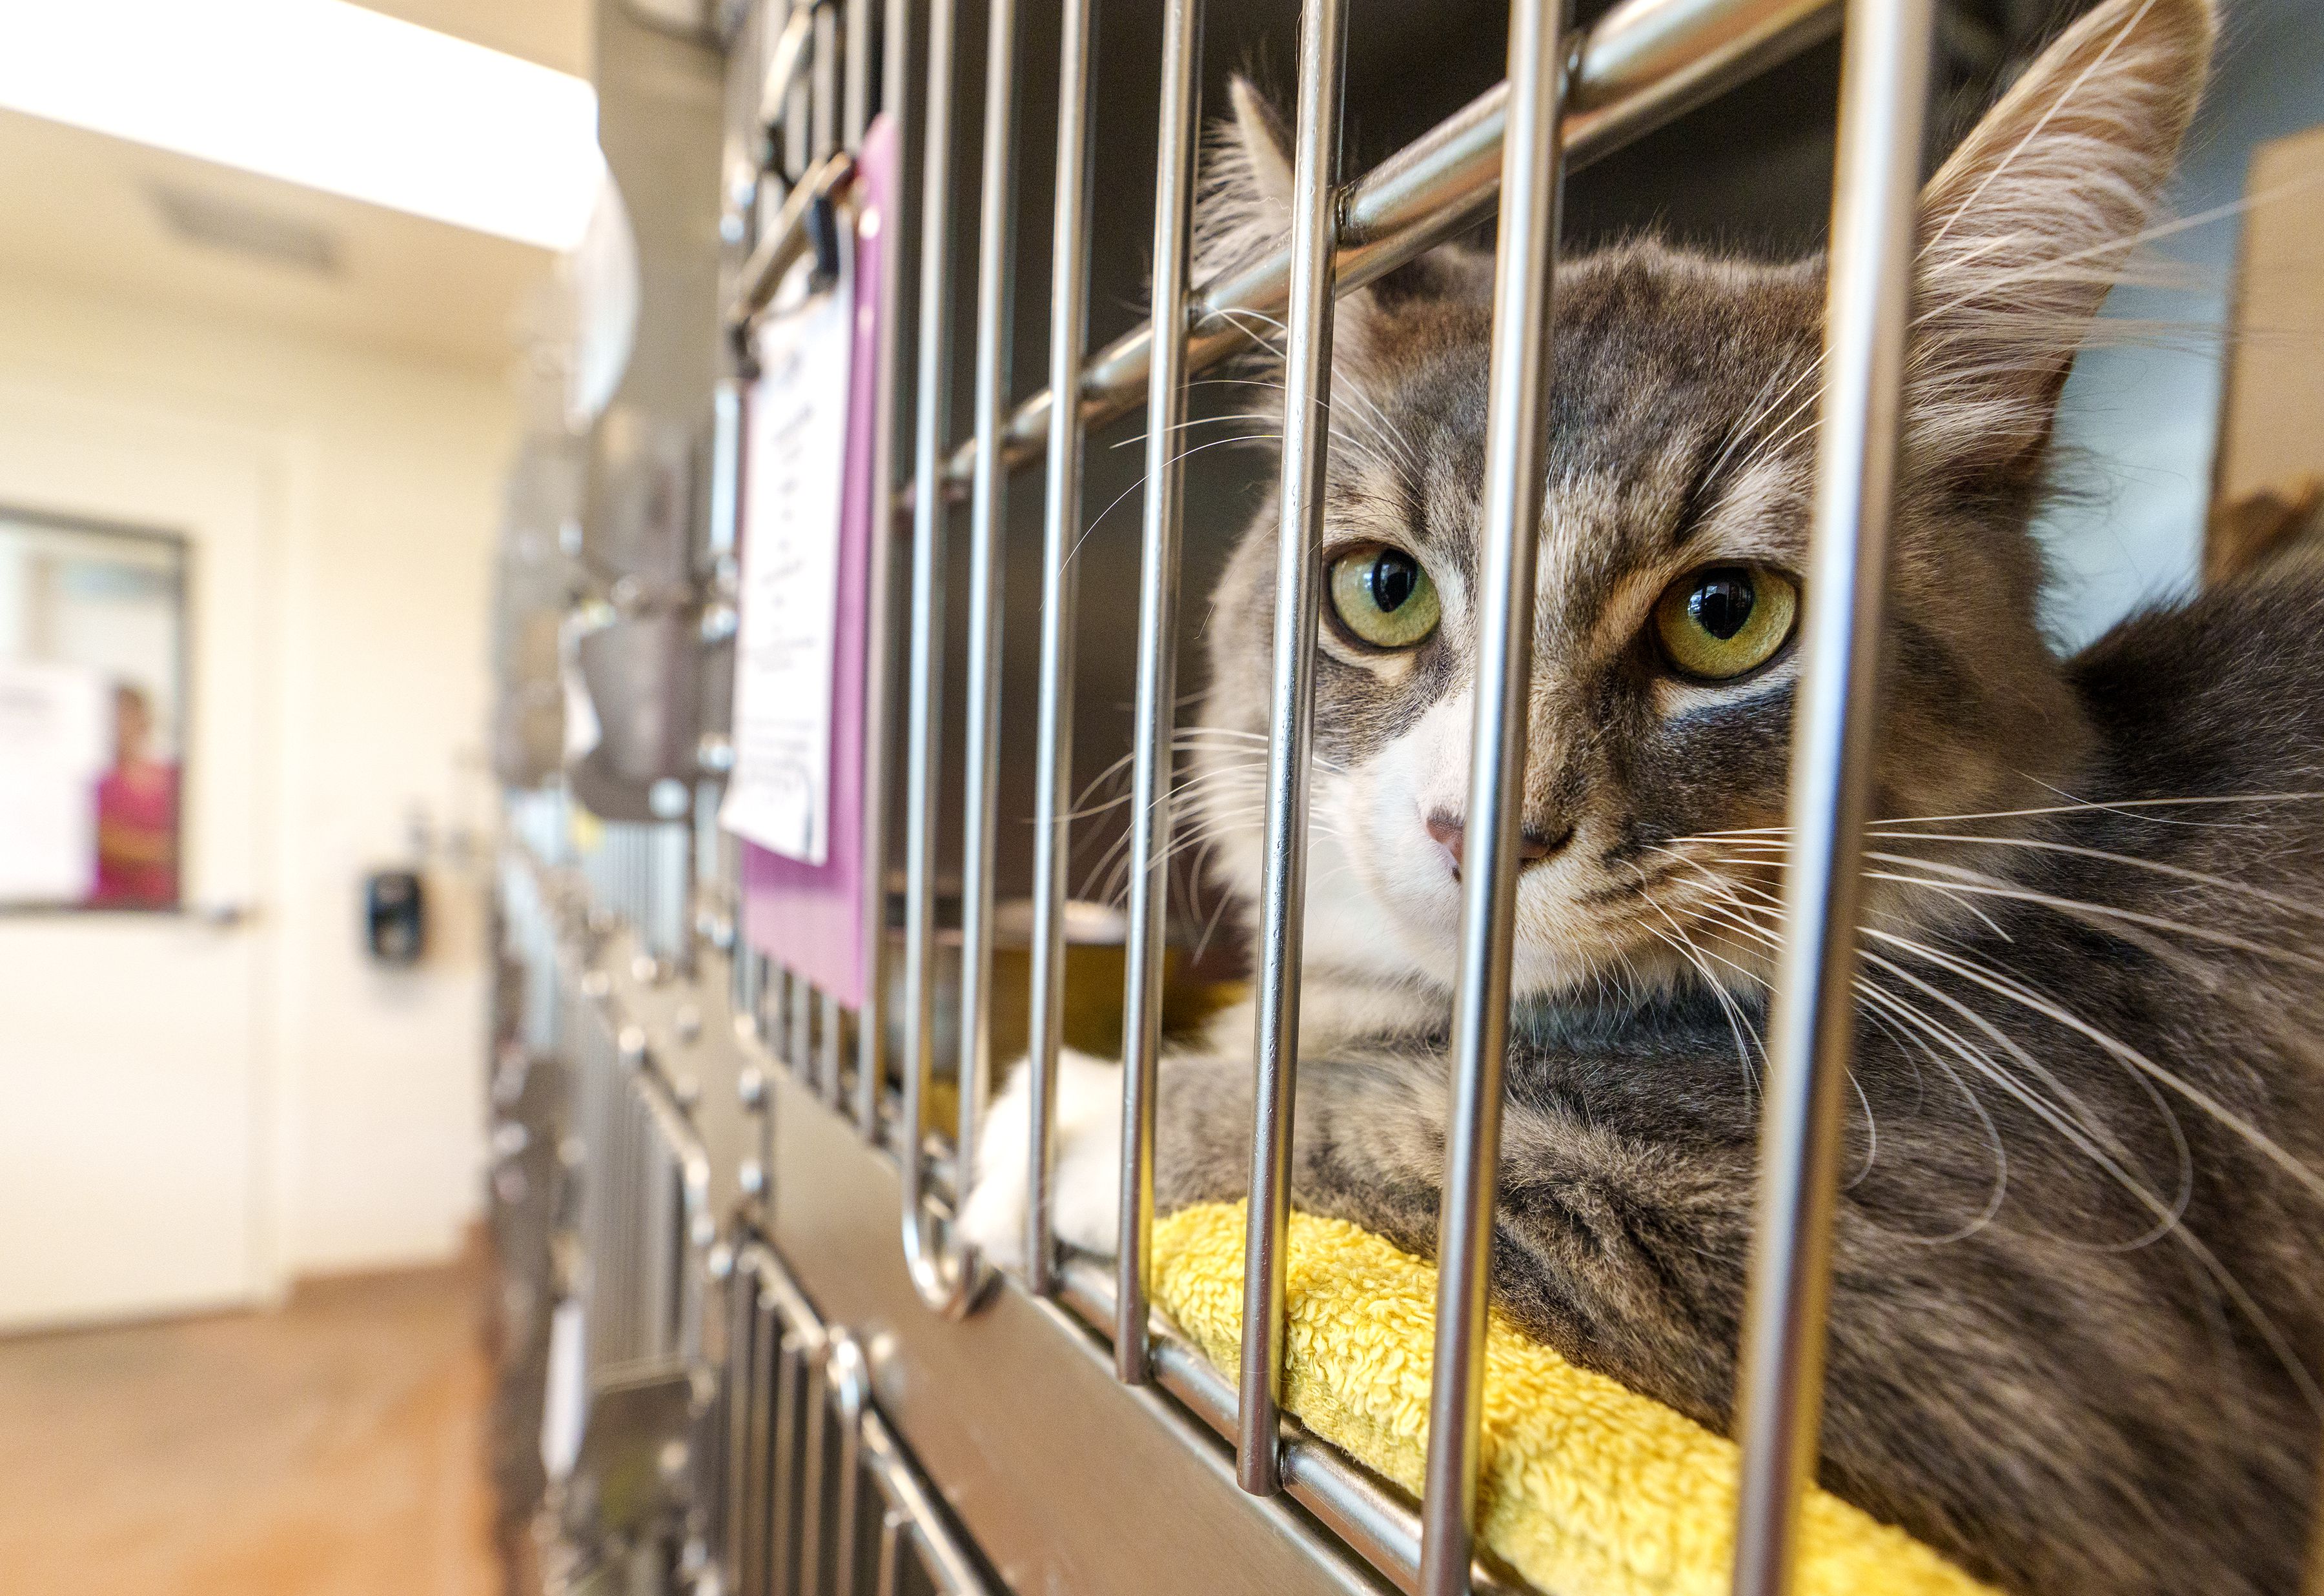 At a Utah animal shelter, cats face gas chamber for failing 'test' that  experts say is flawed